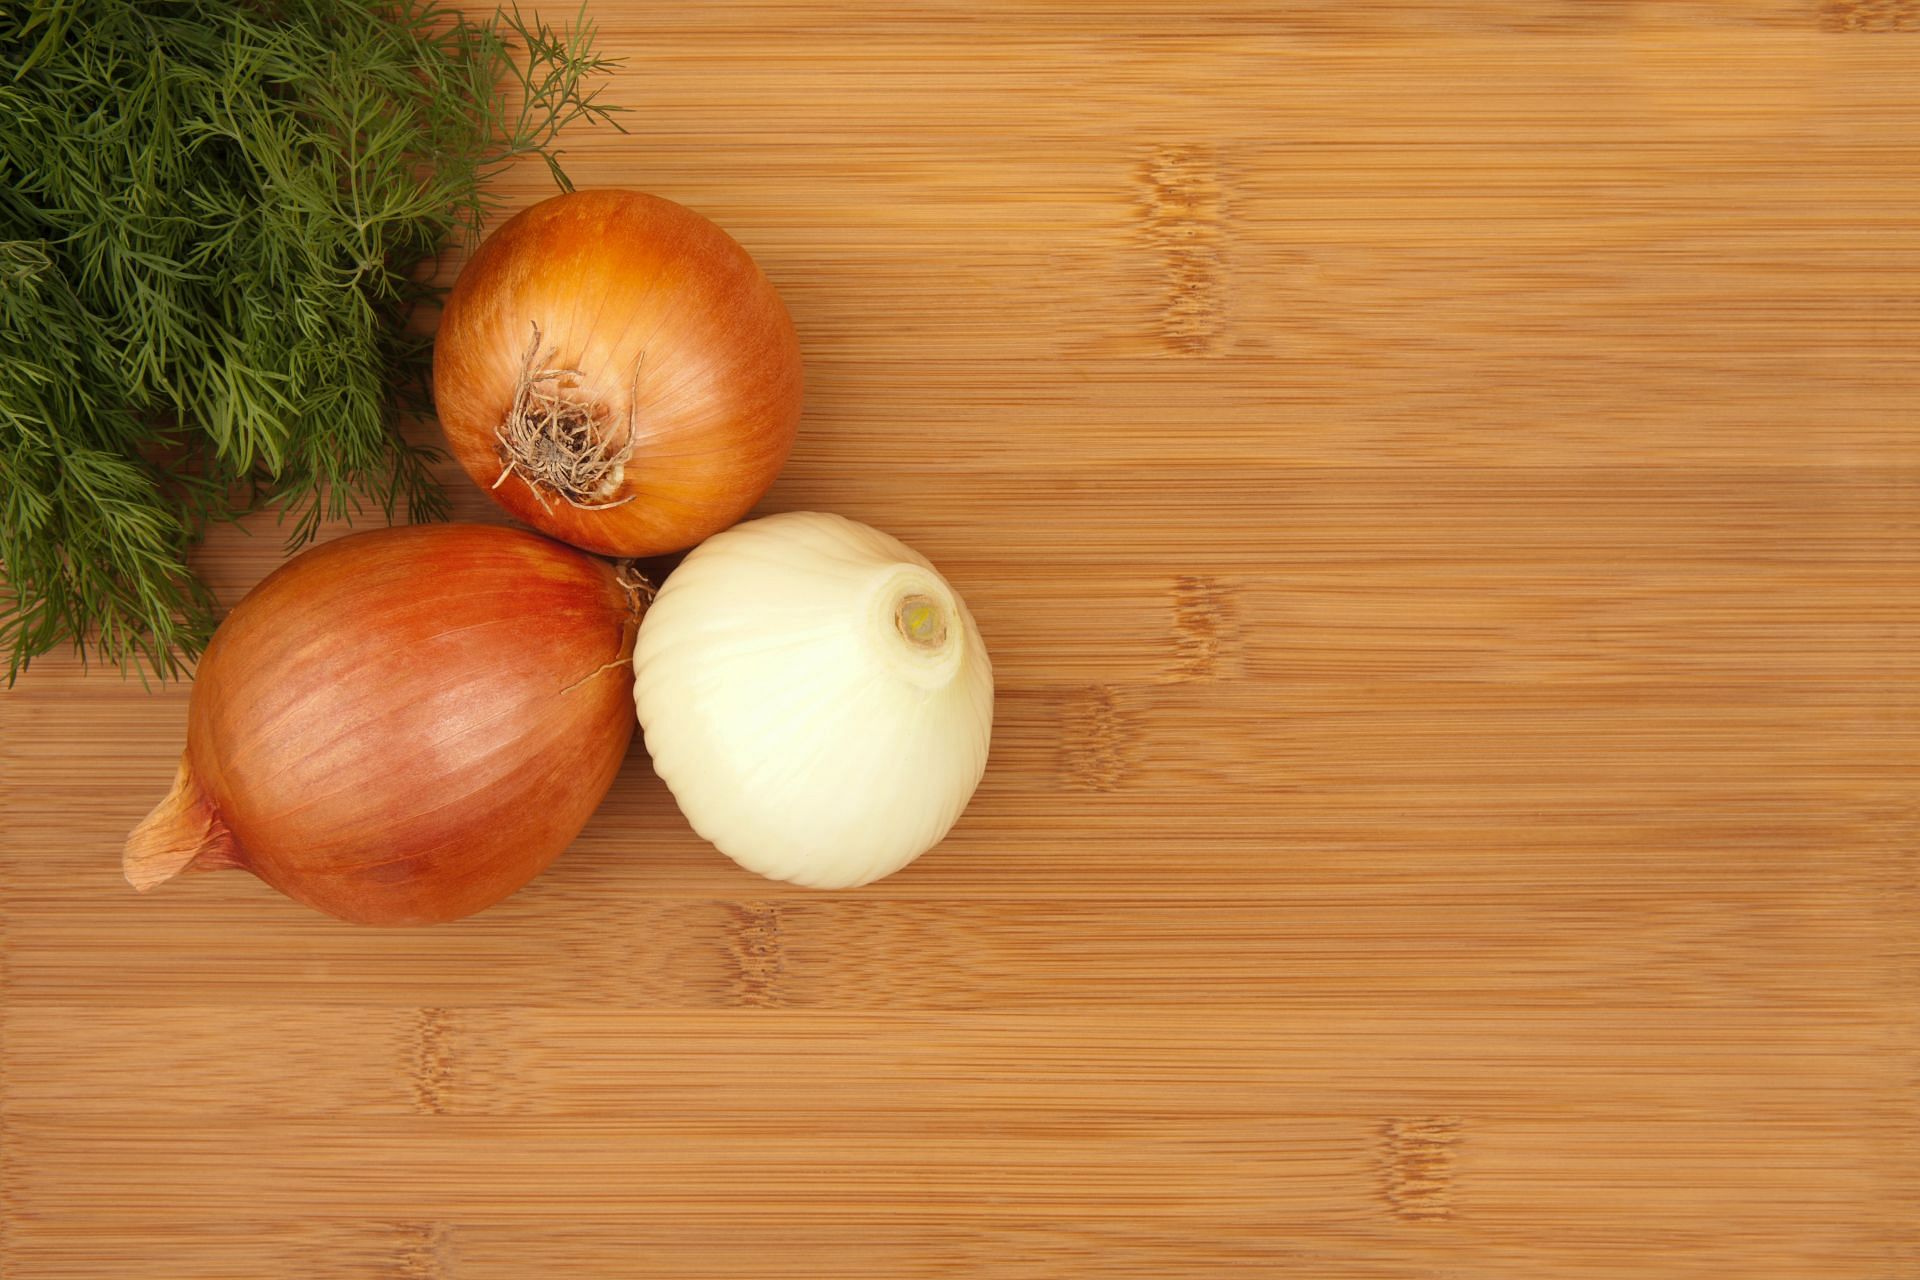 Onions are found in different sizes, colors, and flavors (Image via Unsplash/&Ouml;nder &Ouml;rtel)